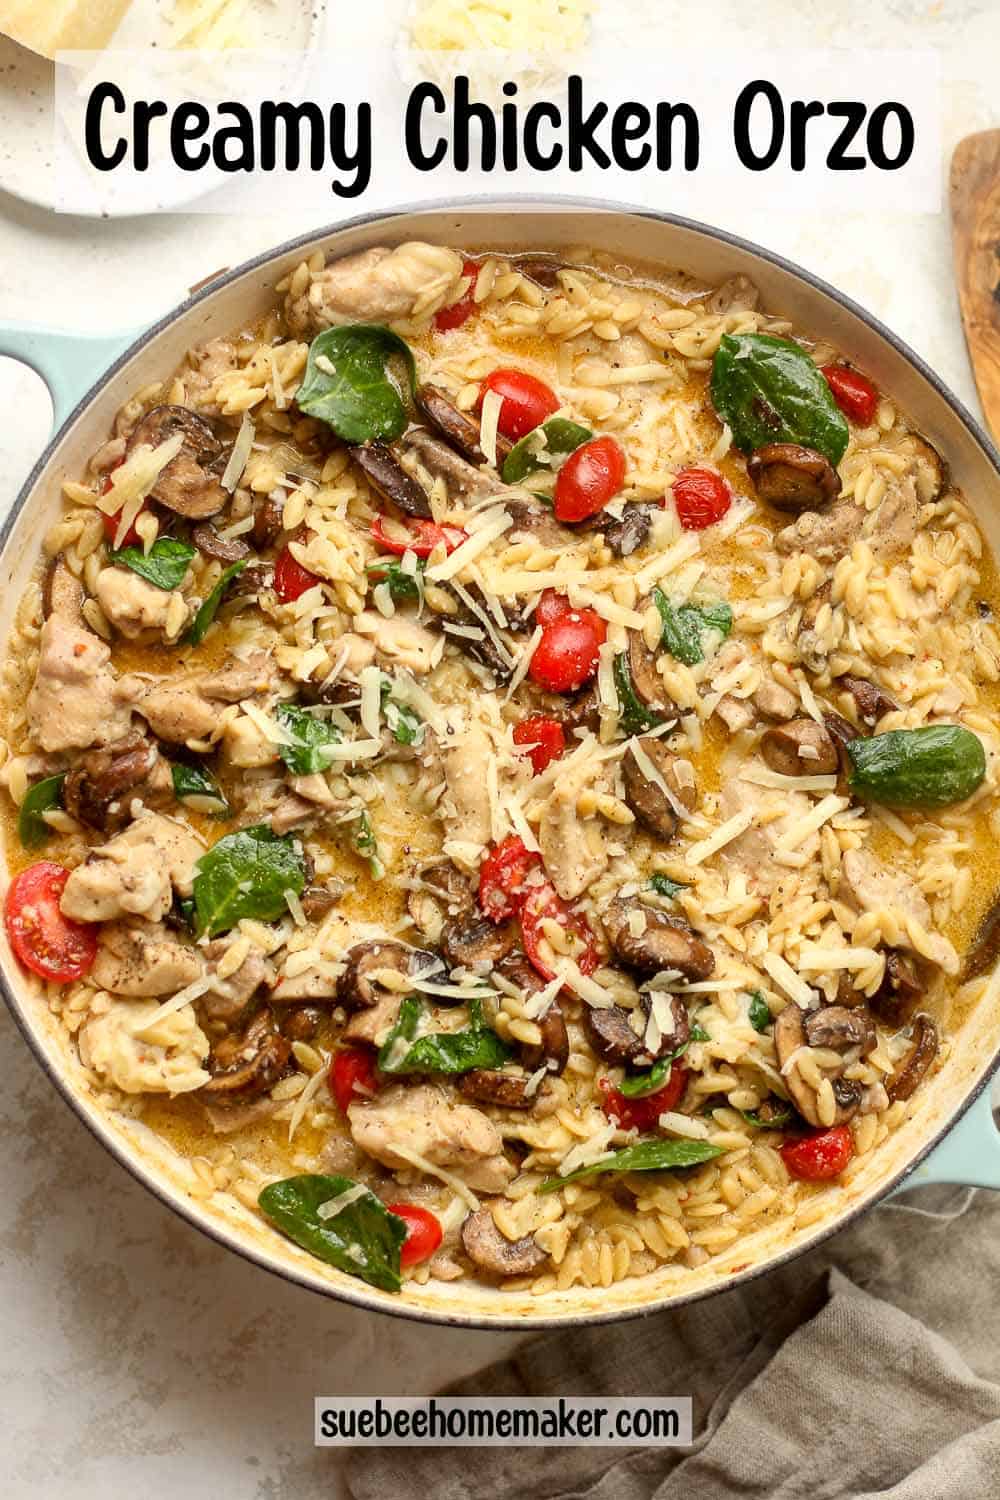 A large pot of the creamy chicken orzo with tomatoes and spinach.